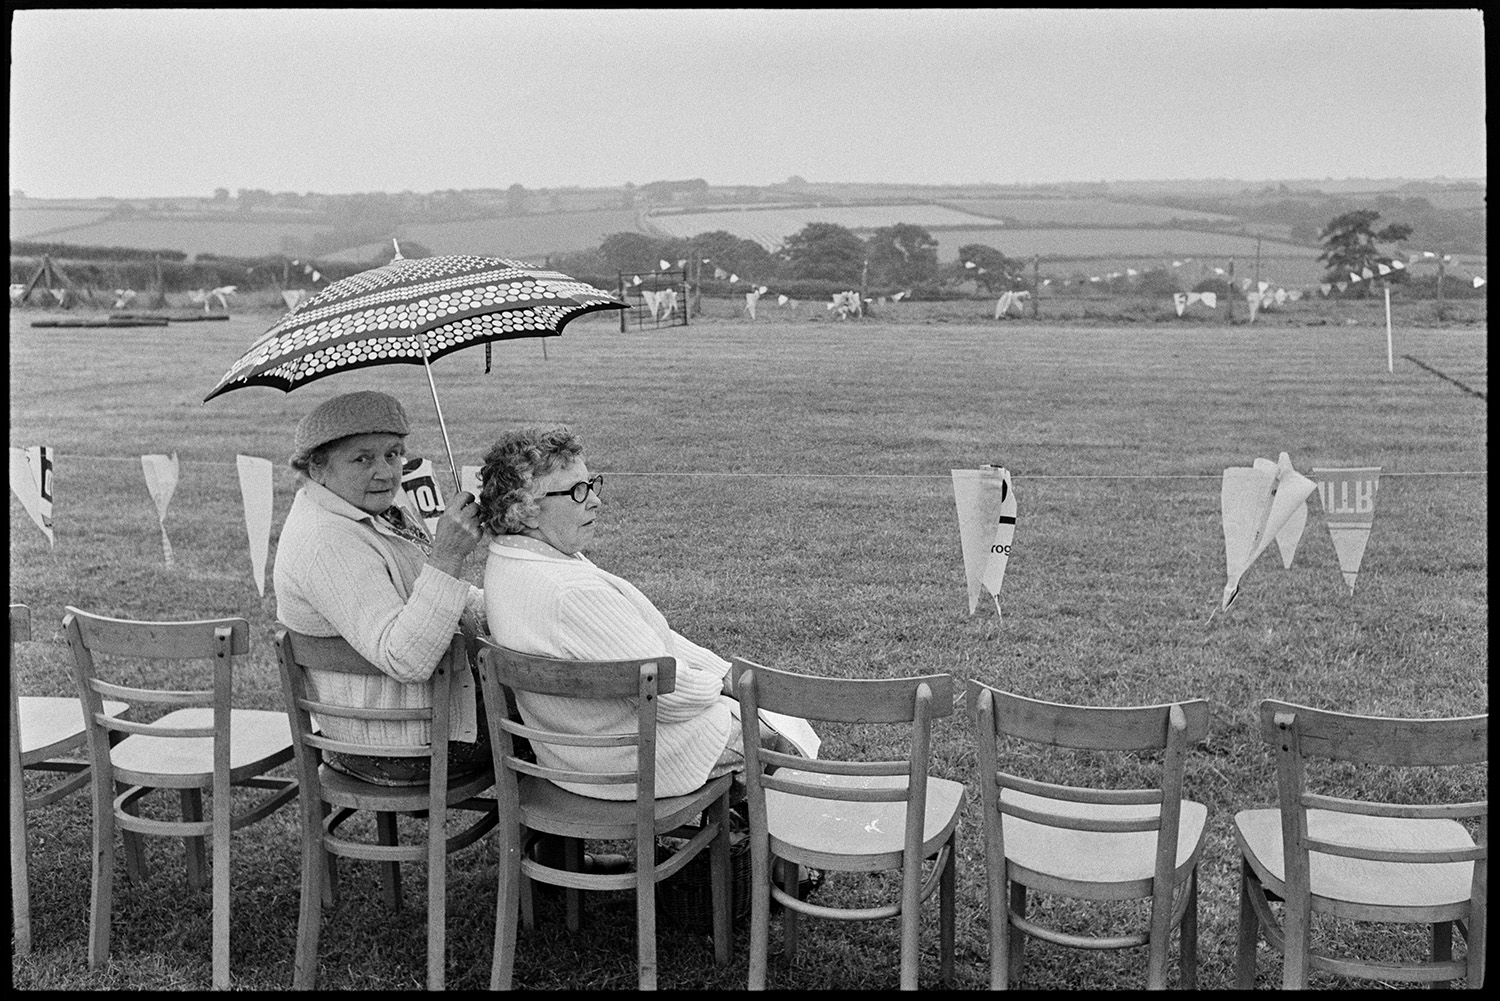 Village sports day, speeches, eating tea in hall, races, people chatting. 
[Two women sat on chairs waiting to watch races at Roborough Sports Day. One of the women is holding an umbrella. The field is decorated with bunting.]